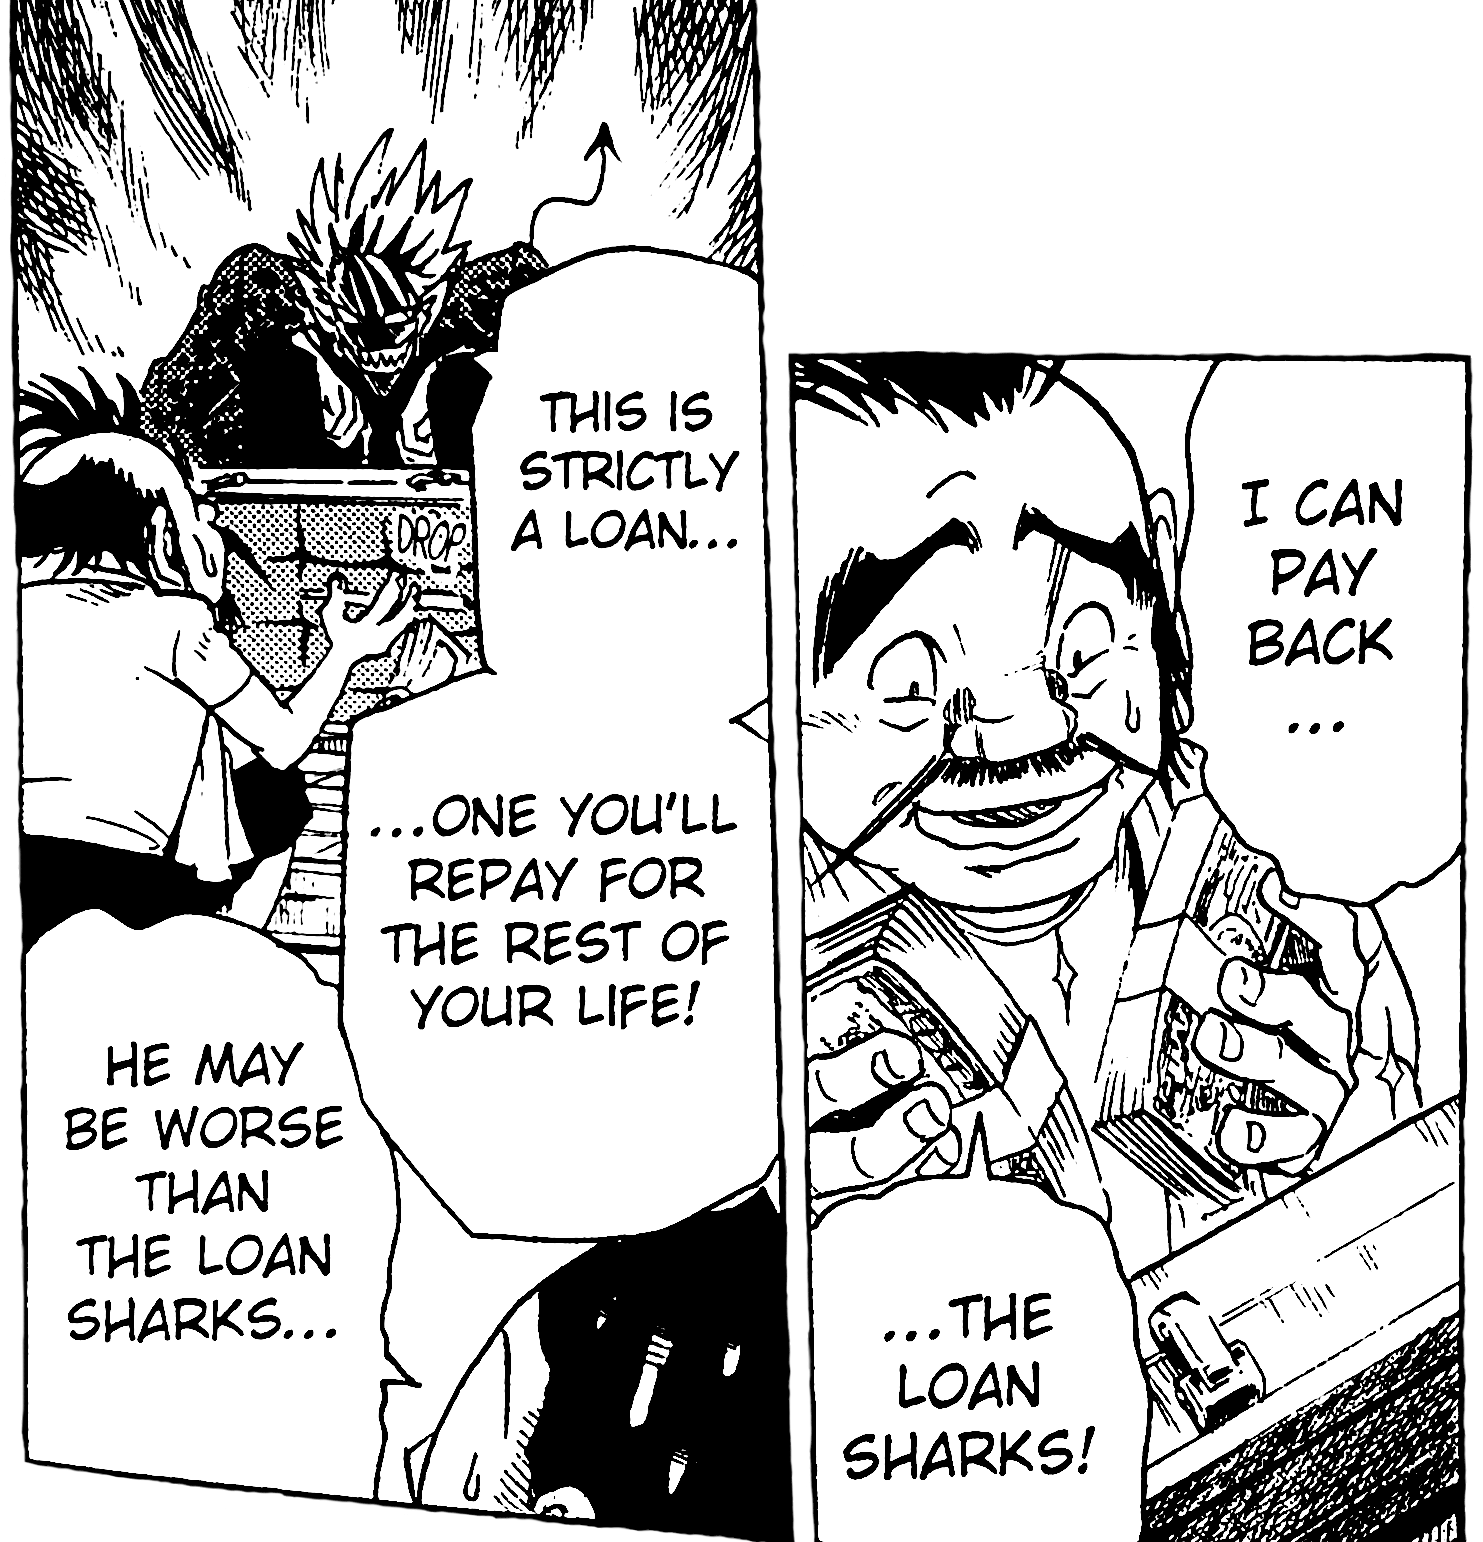 Two manga panels showing Doburoku smiling as he holds wads of cash from Hiruma in his hands, saying 'I can pay back...the loan sharks!', only to drop them once he looks up at a grinning, devlish Hiruma, who tells him, 'This is strictly a loan...one you'll be paying for the rest of your life!' Kurita nervously remarks, 'He may be worse than the loan sharks...'